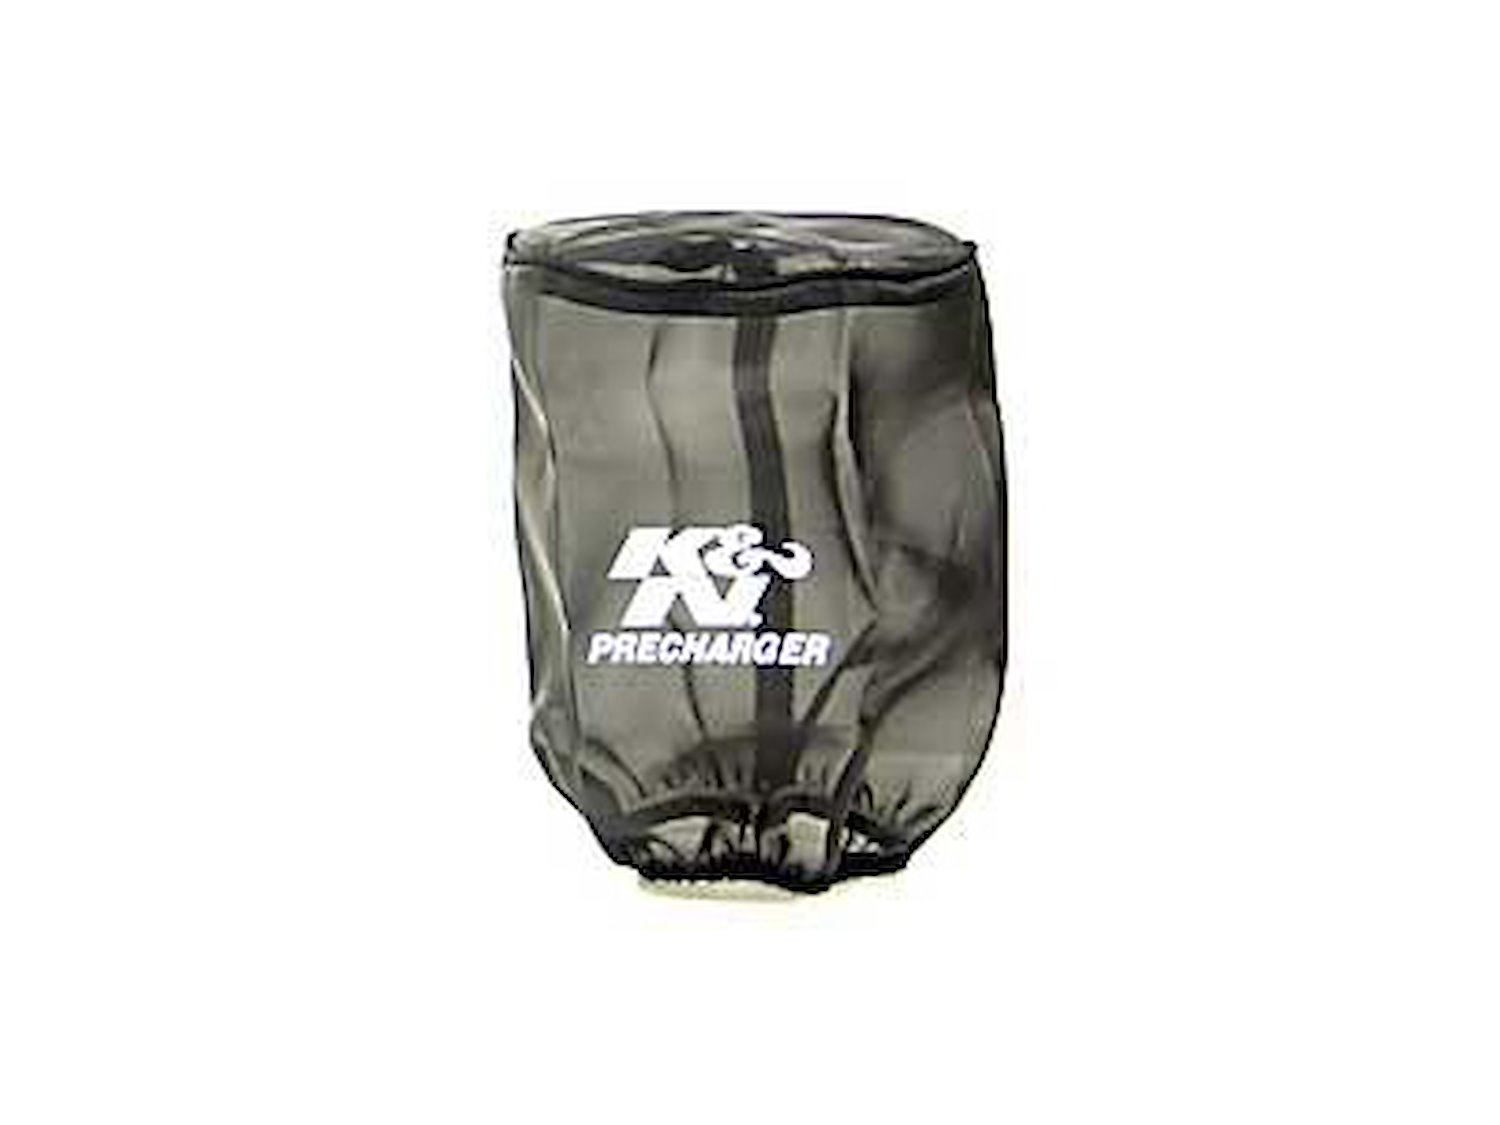 Round Straight Air Filter Wrap Wrap Type: Precharger